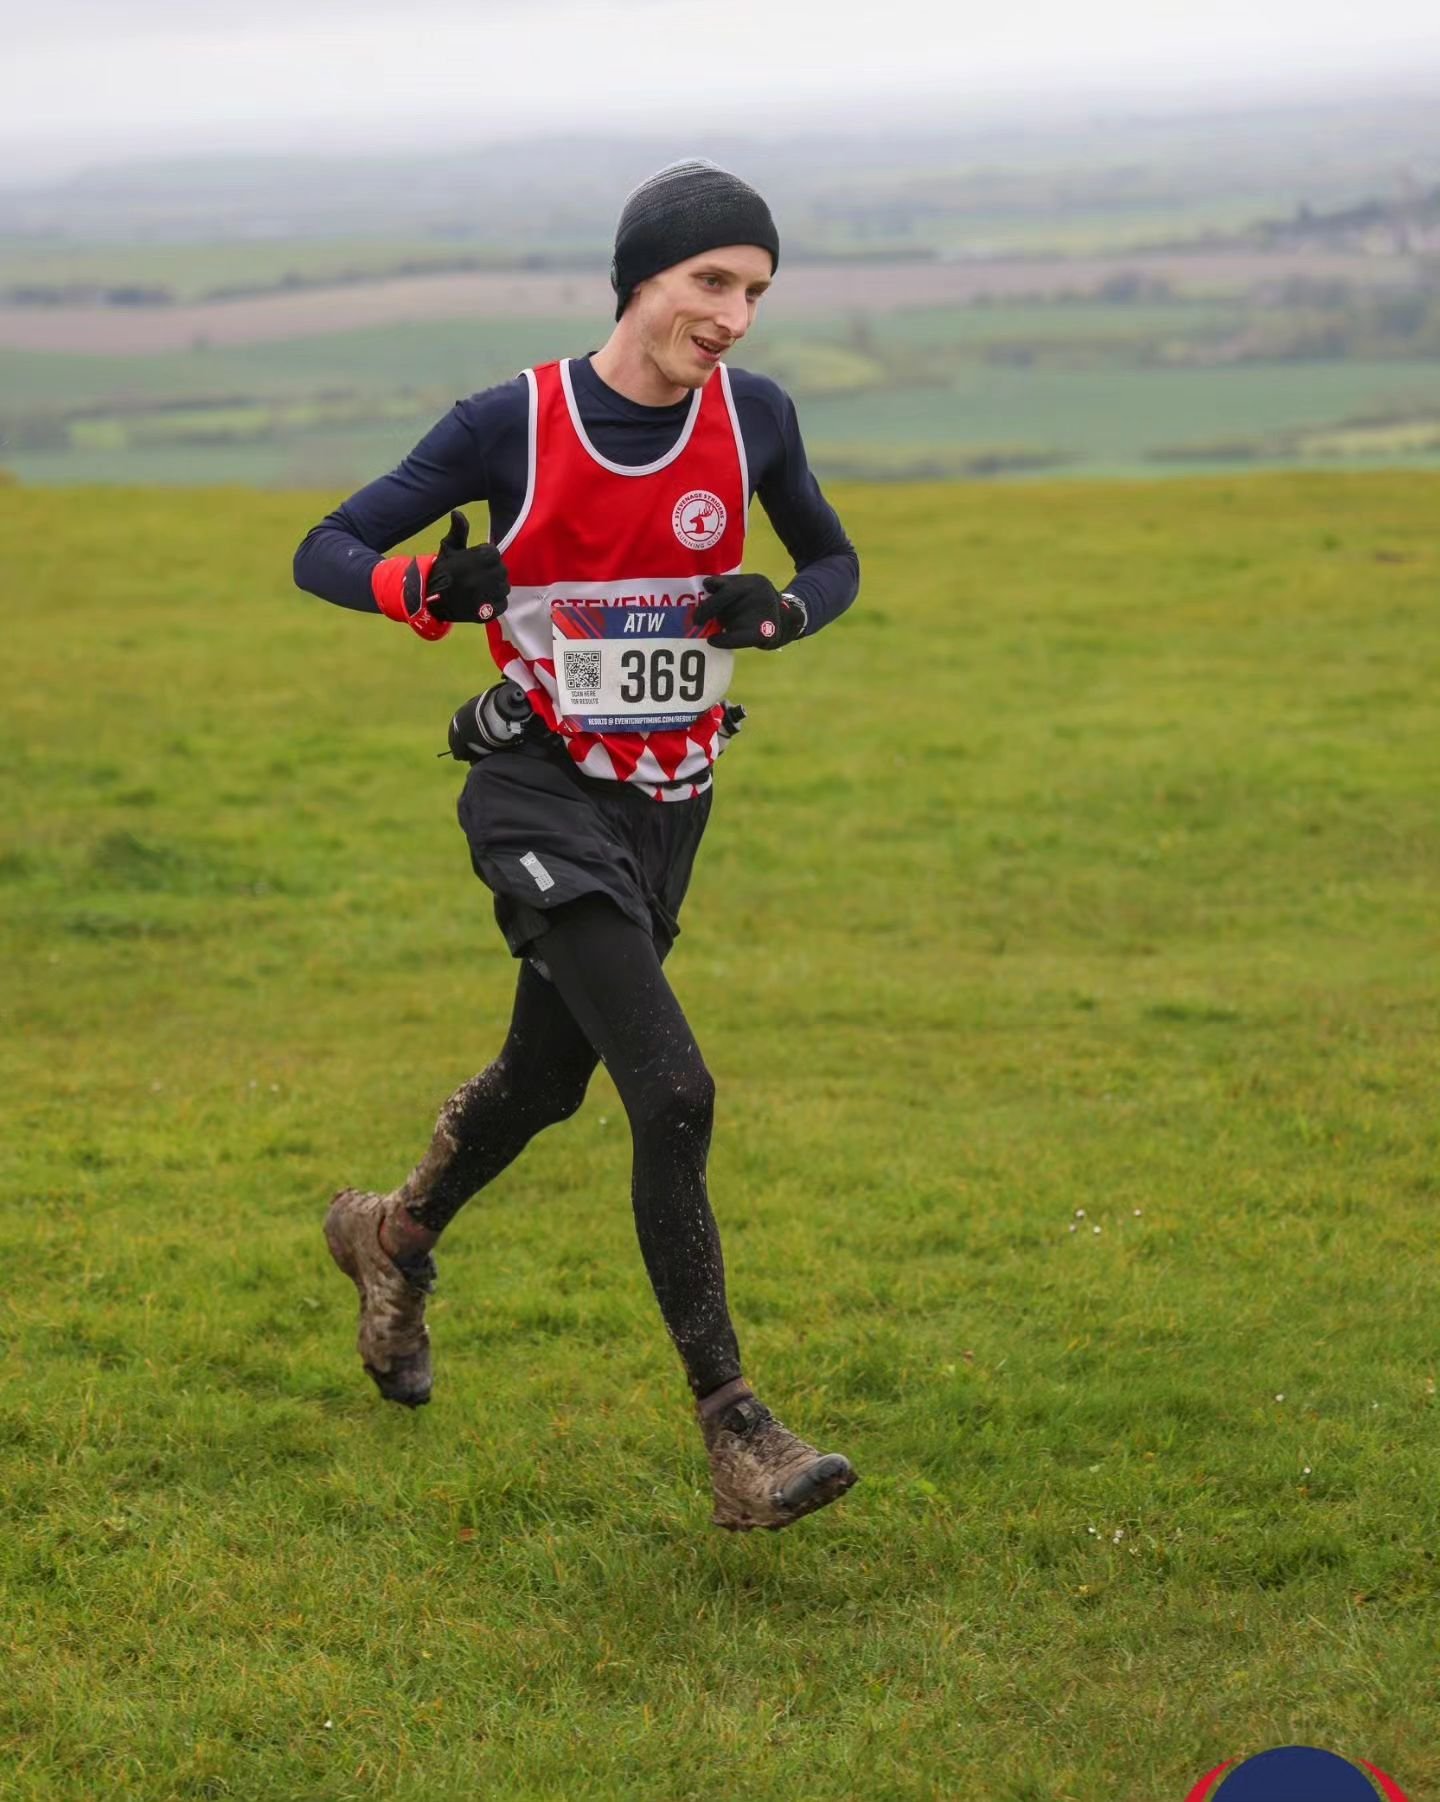 A few Striders visited Dunstable Downs in torrential rain to take on the @eventsatw Bison Trail run. 

Matthew Robinson completed the 26km distance in an incredible 2:10:03 and came away with an absolutely amazing 1st place finish!🏆

A special shout